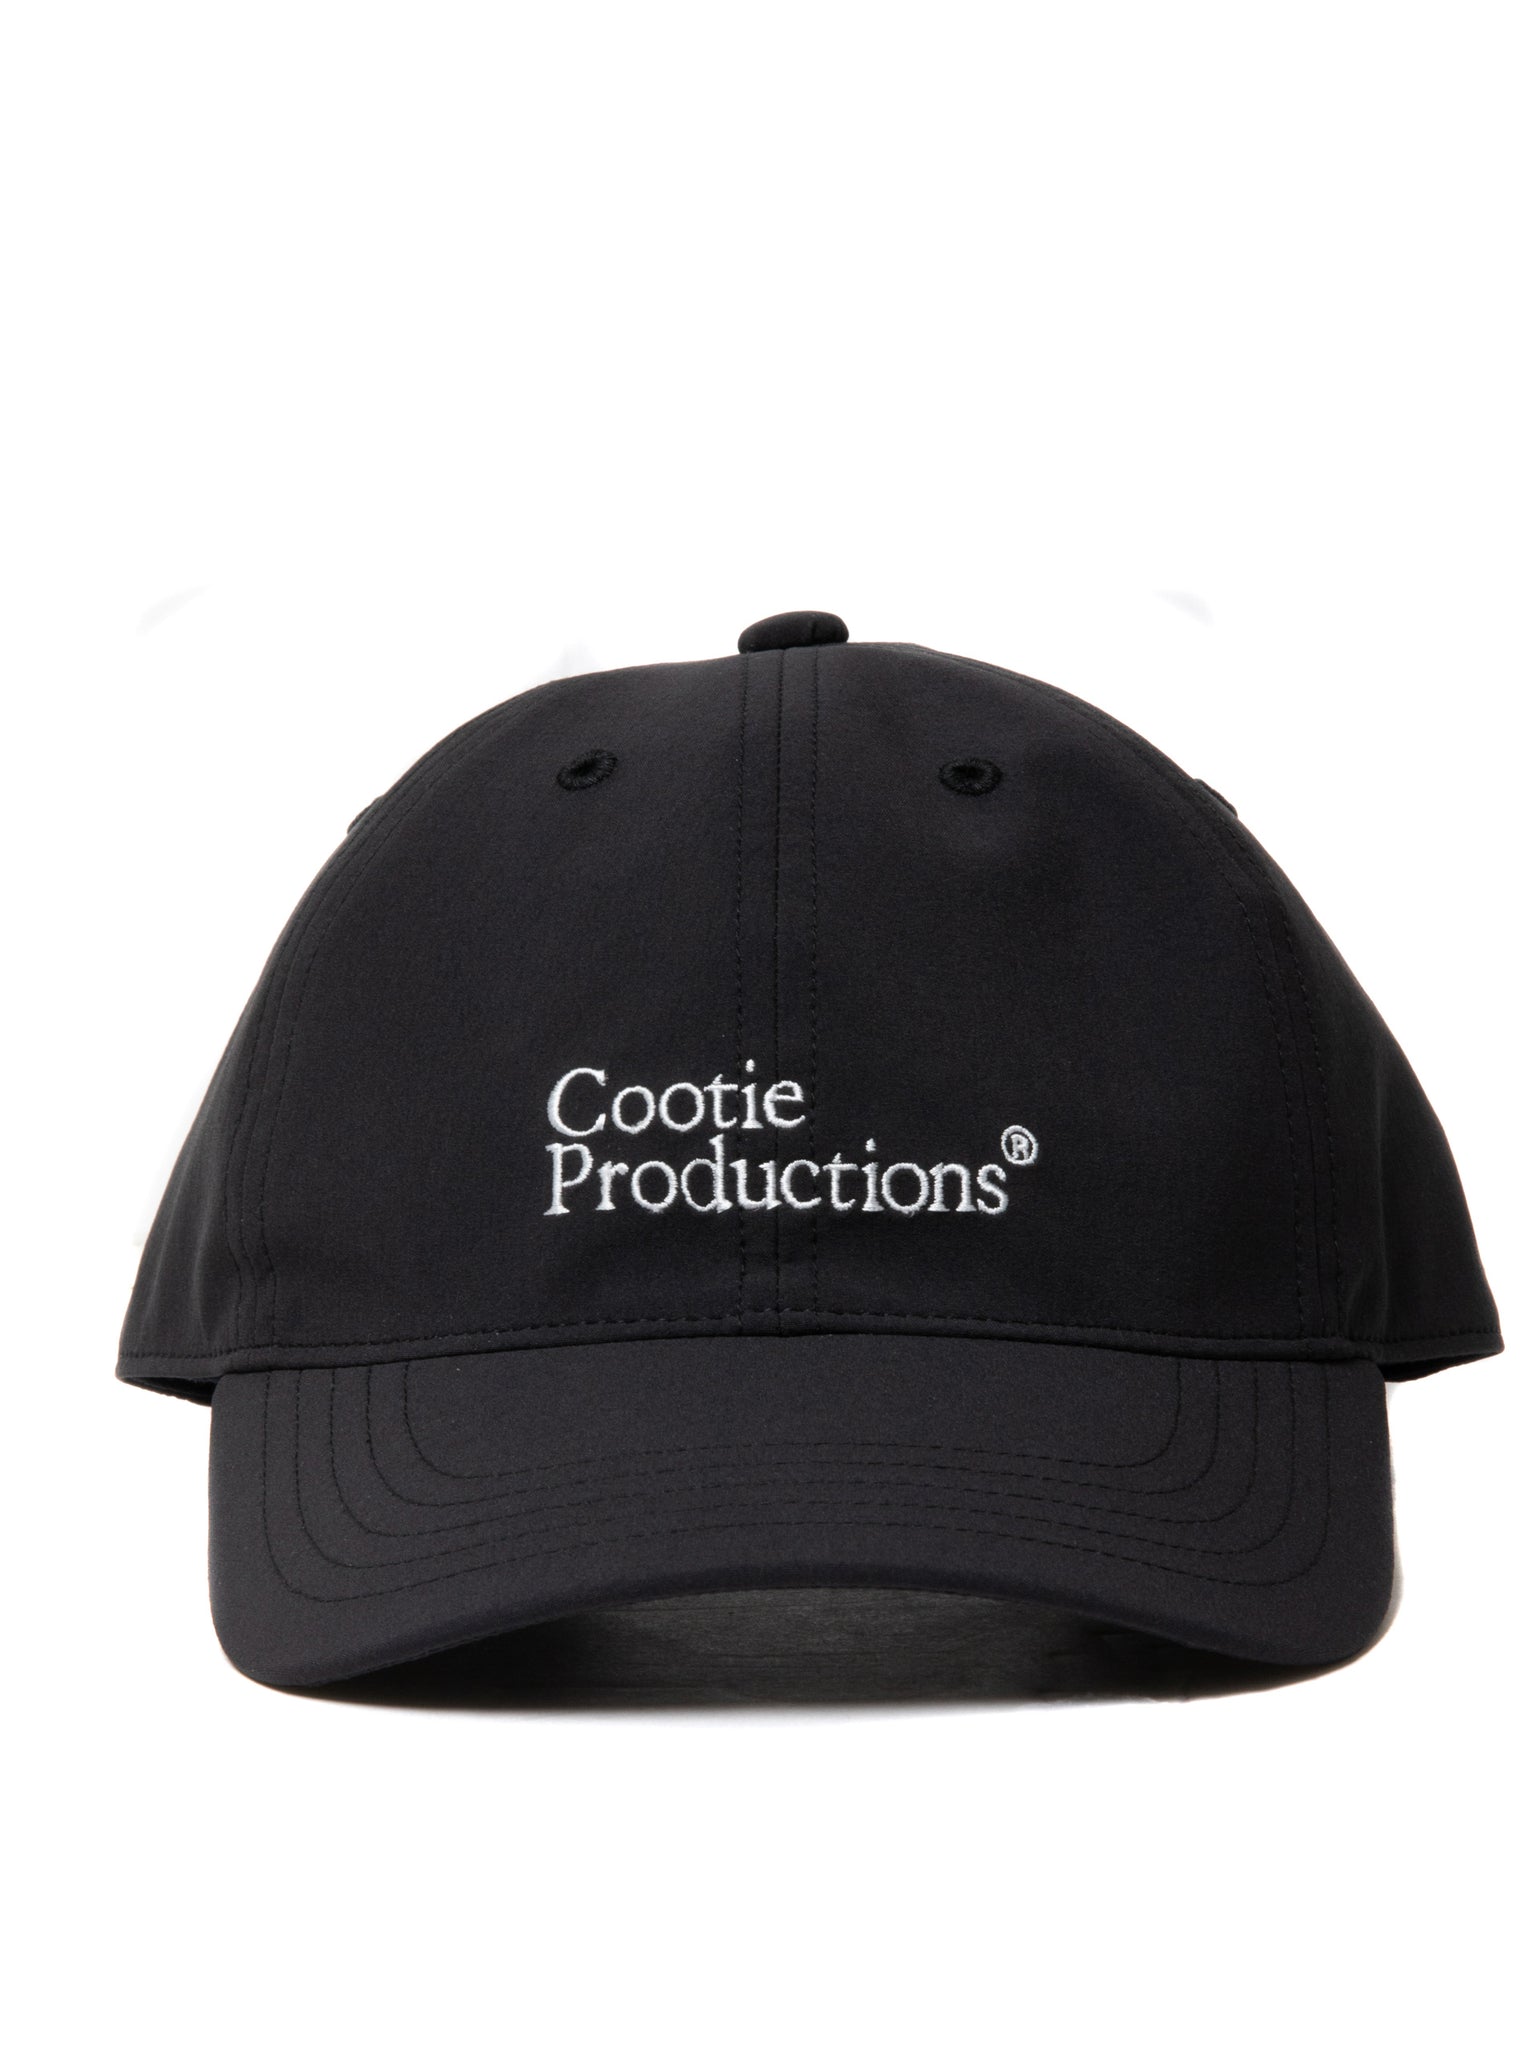 ALL ITEMS – COOTIE PRODUCTIONS